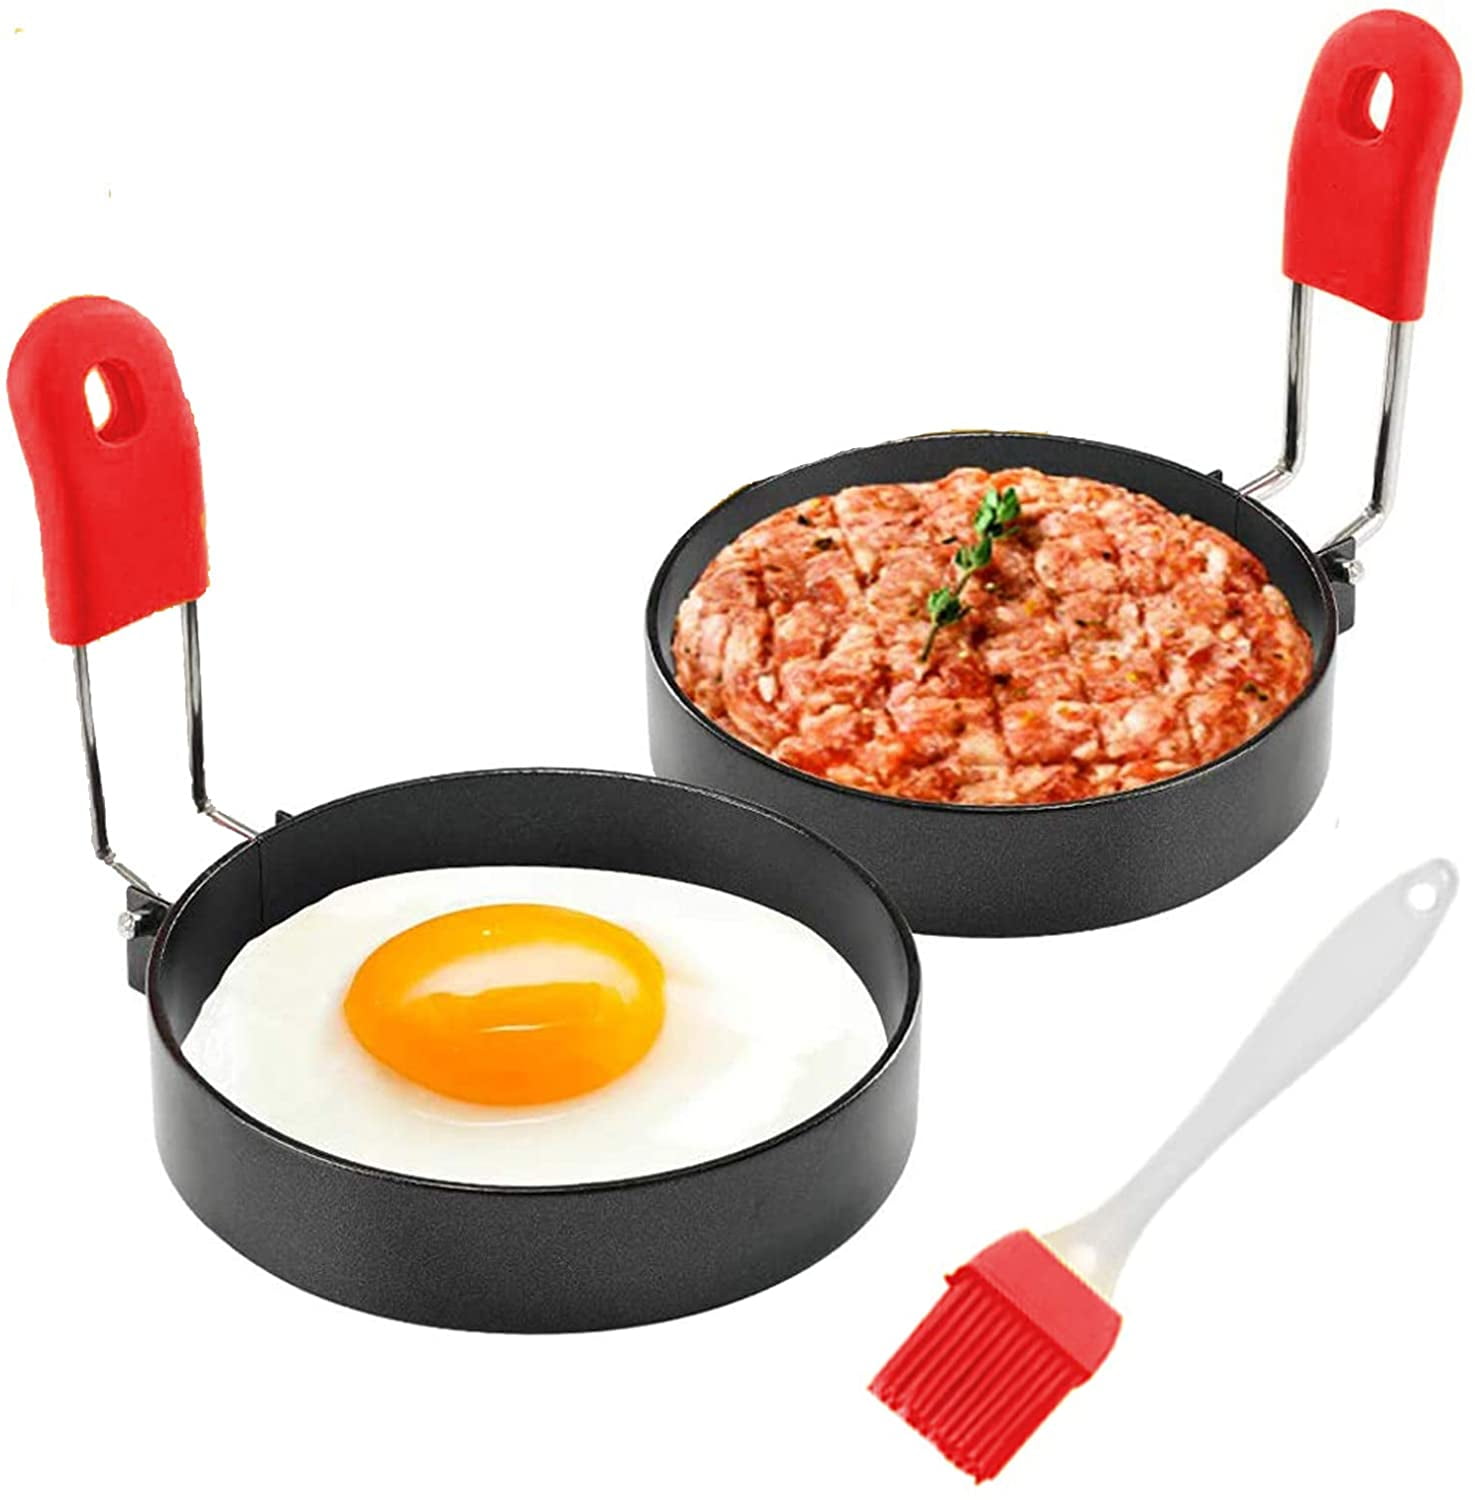 New Egg Poaching Rings Silicone & Stainless  Cups Pancake Burgers